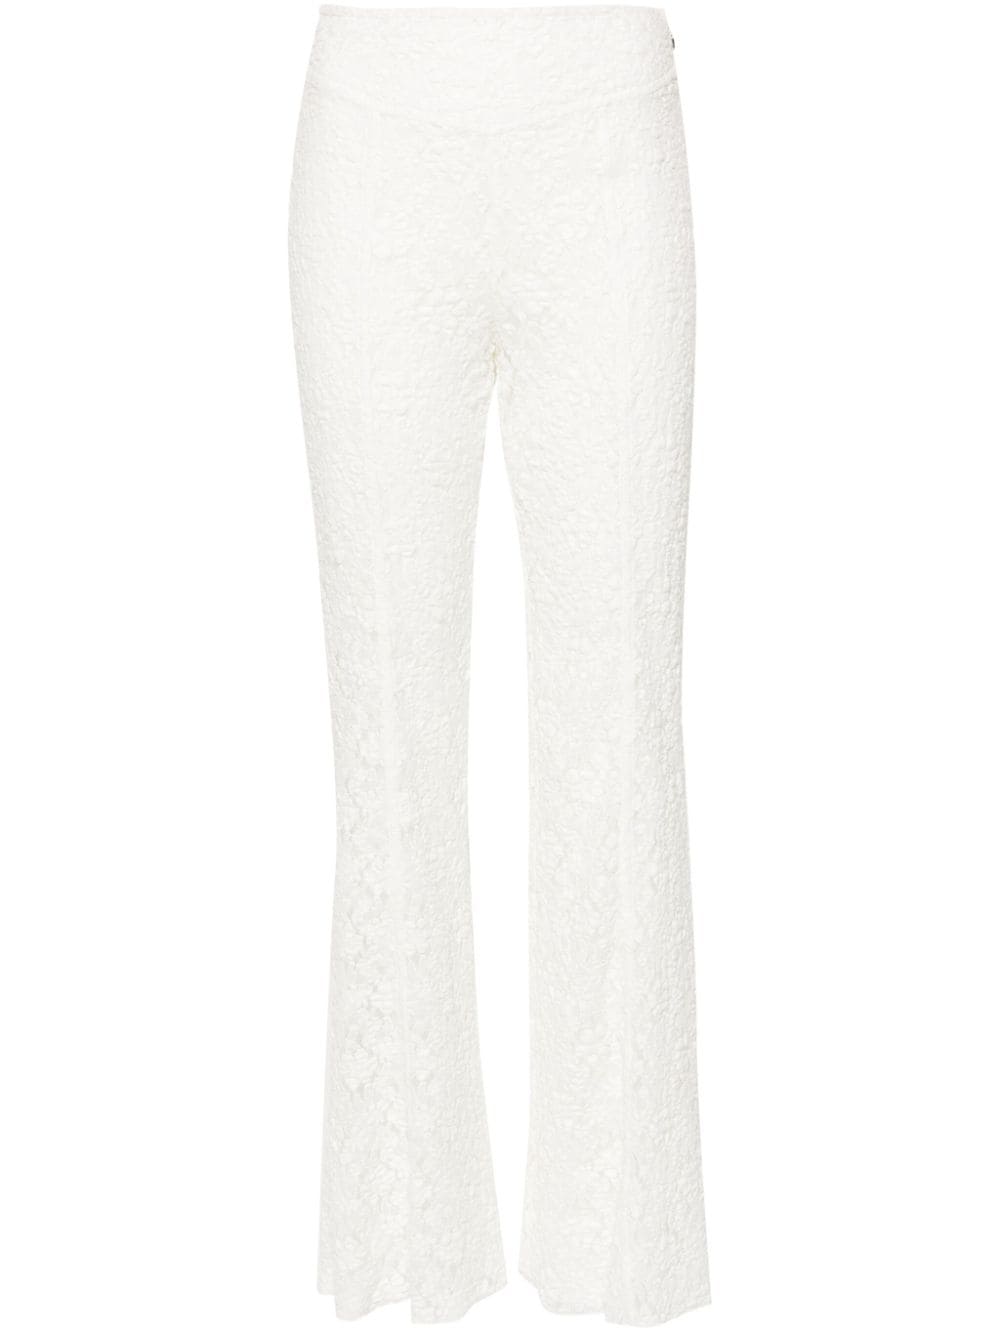 floral-lace flared trousers